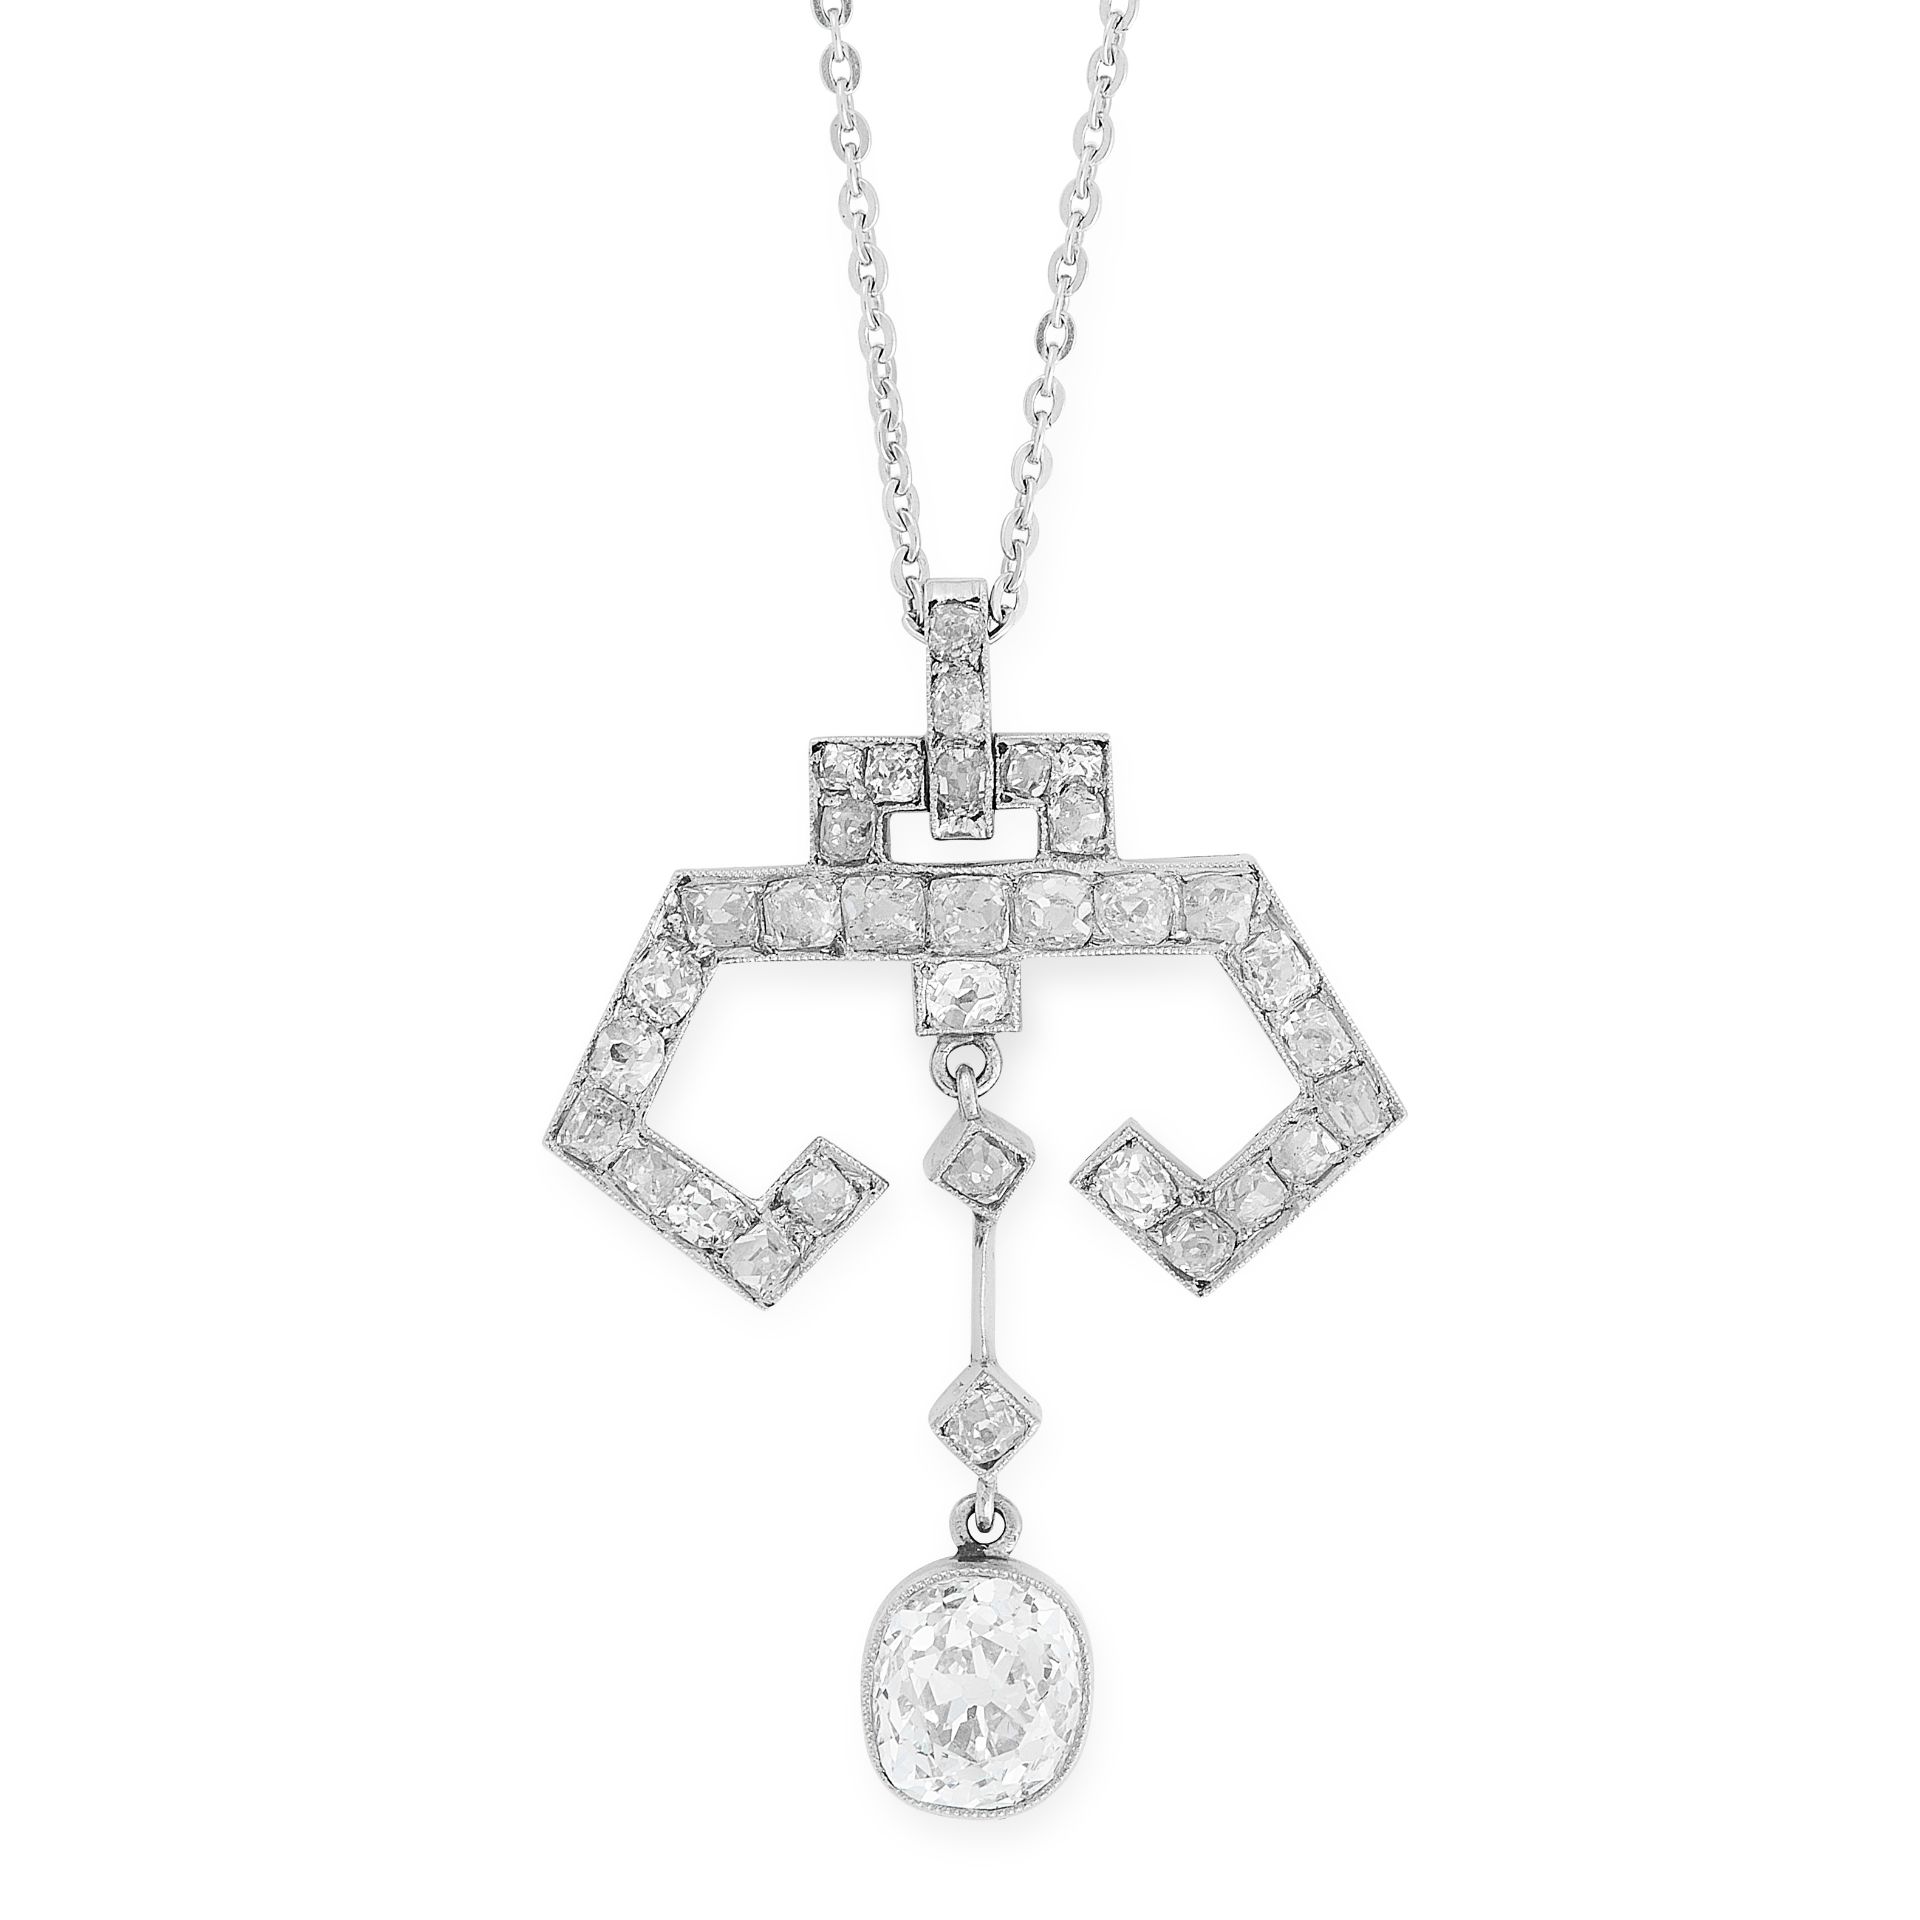 AN ART DECO DIAMOND PENDANT AND CHAIN, EARLY 20TH CENTURY in 18ct white gold, set with an old cut